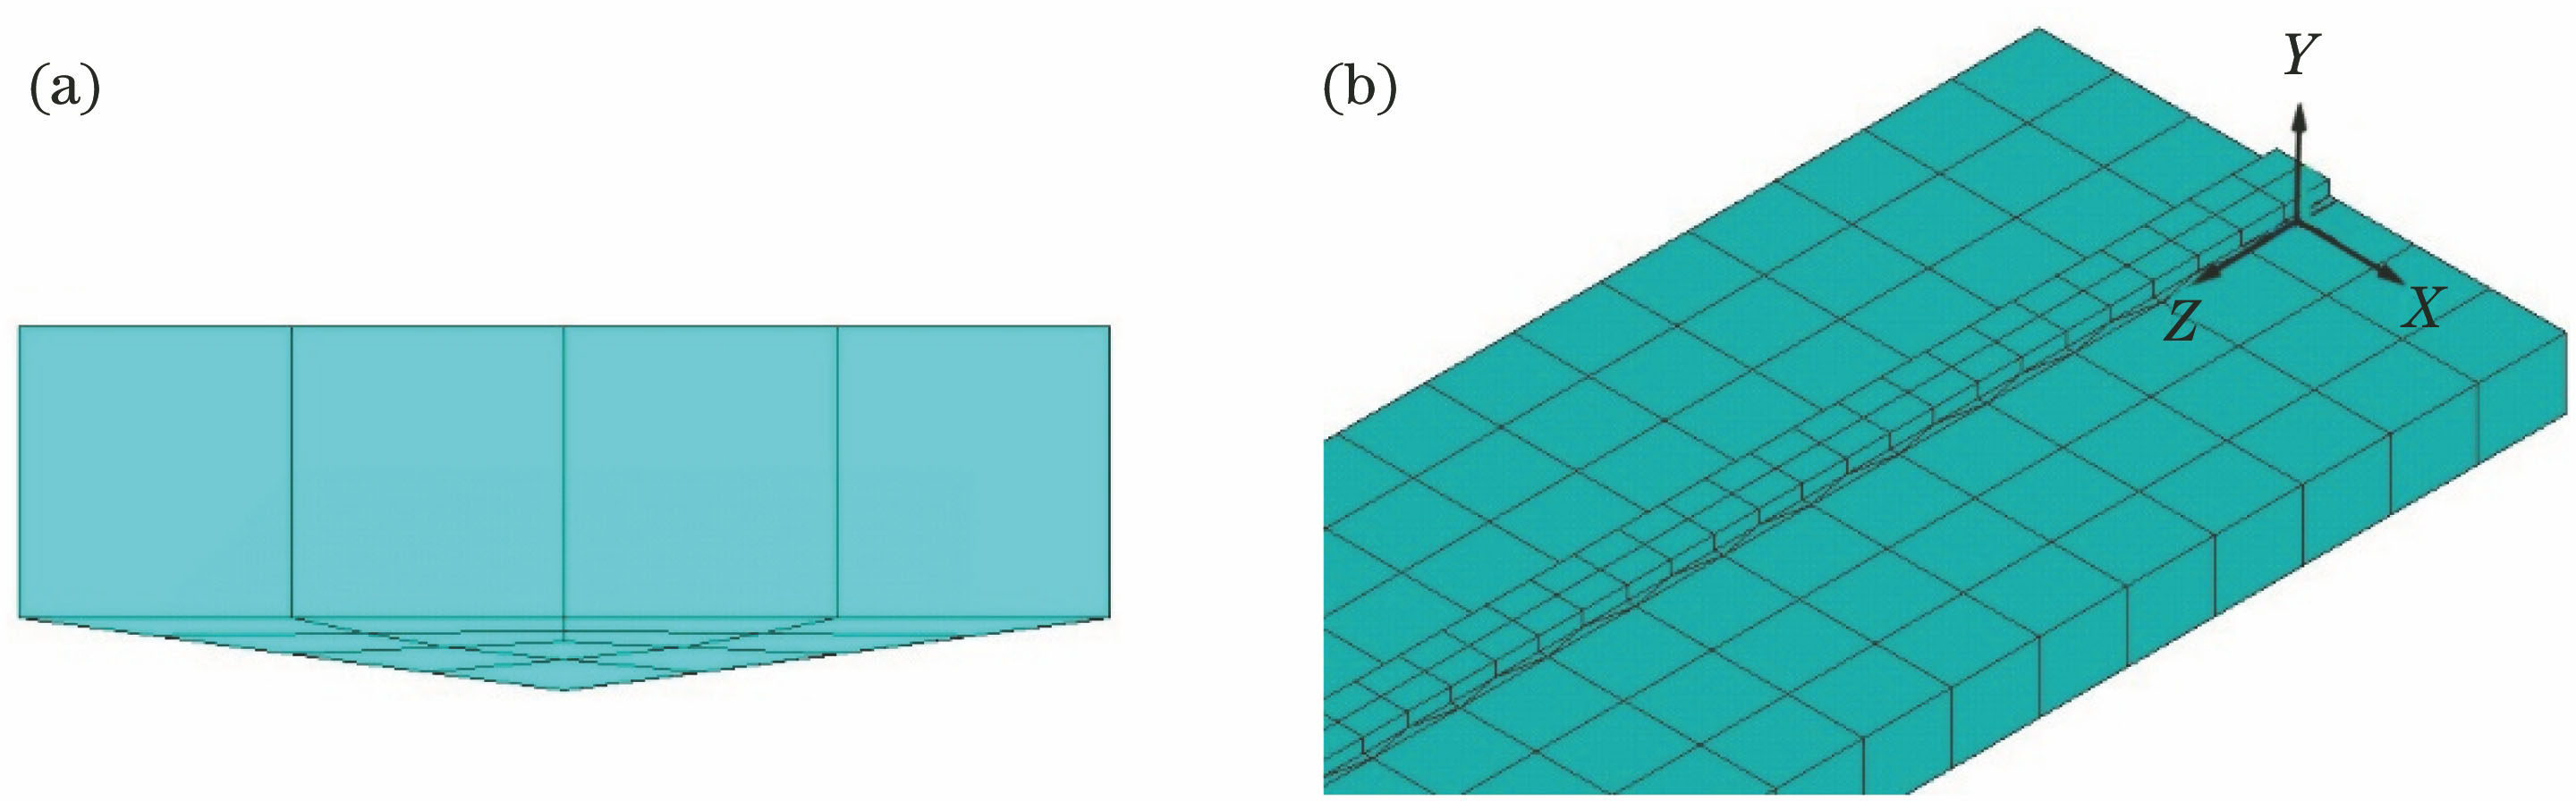 Cross section of cladding layer and meshing. (a) Cross section of cladding layer; (b) meshing